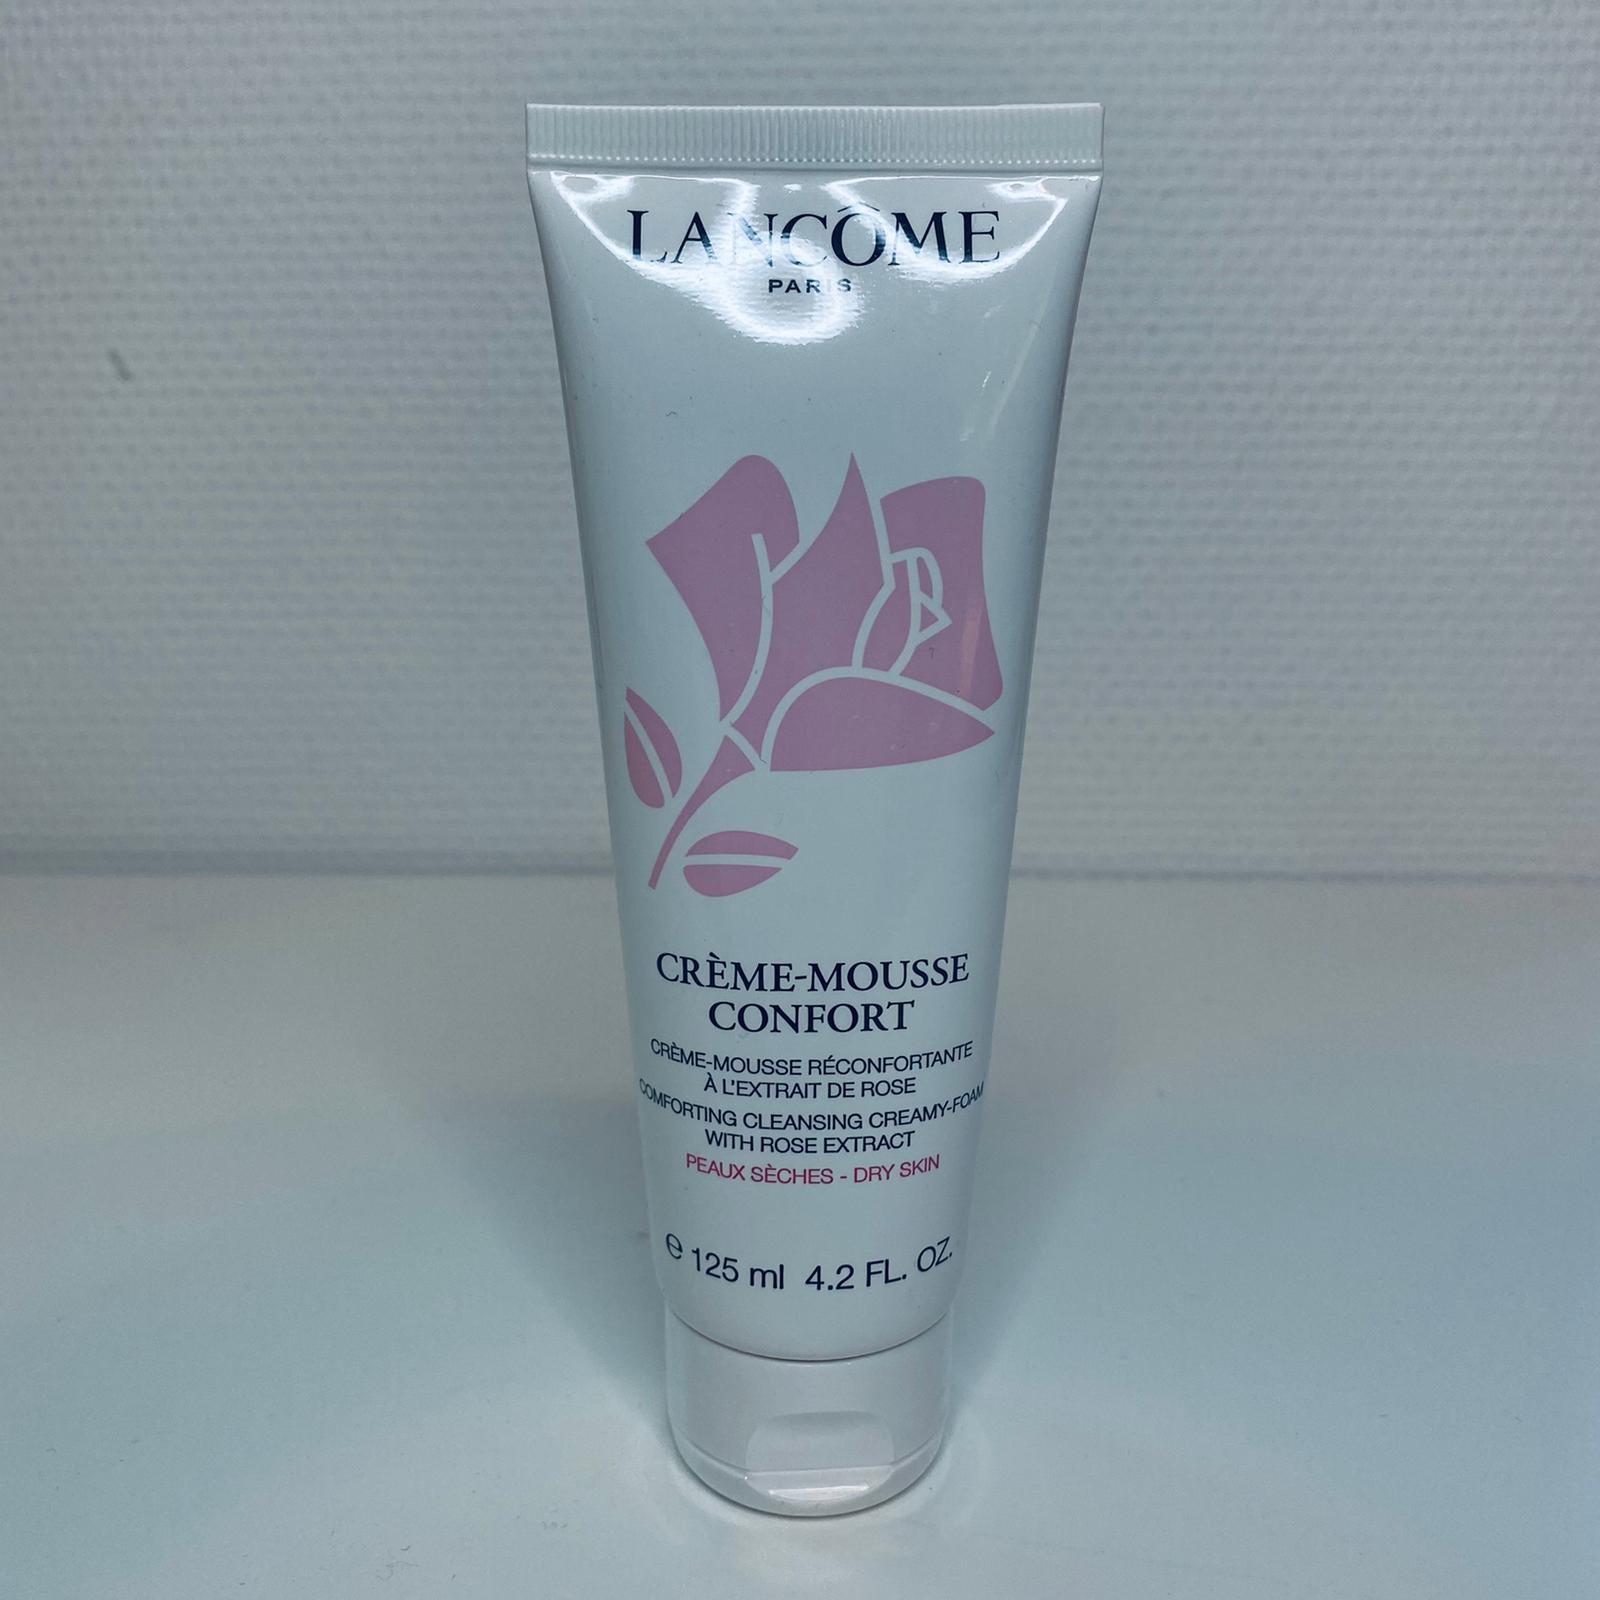 Lancome creme mousse confort dry skin 125 ml